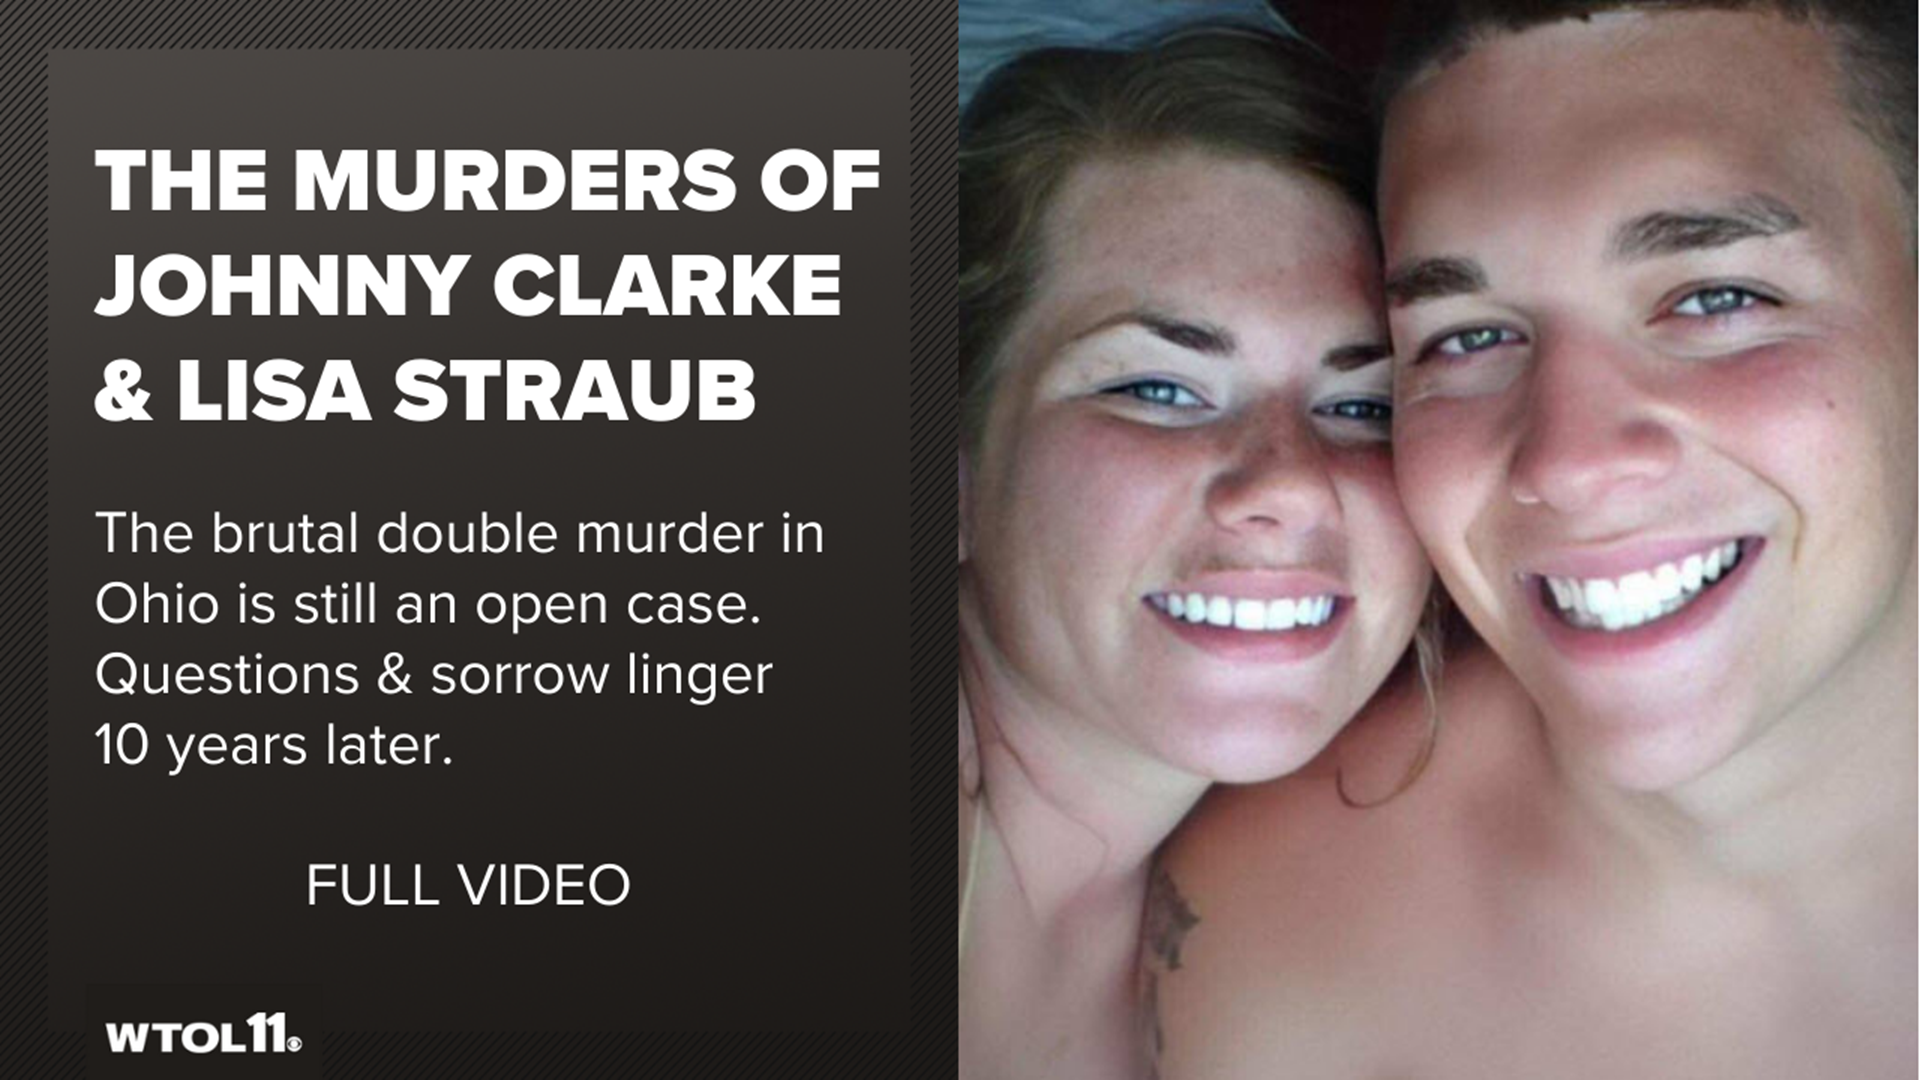 When Johnny Clarke and Lisa Straub were killed inside a Holland home in true crime brutal murders on Jan. 30, 2011, it shocked the community. The case remains open.